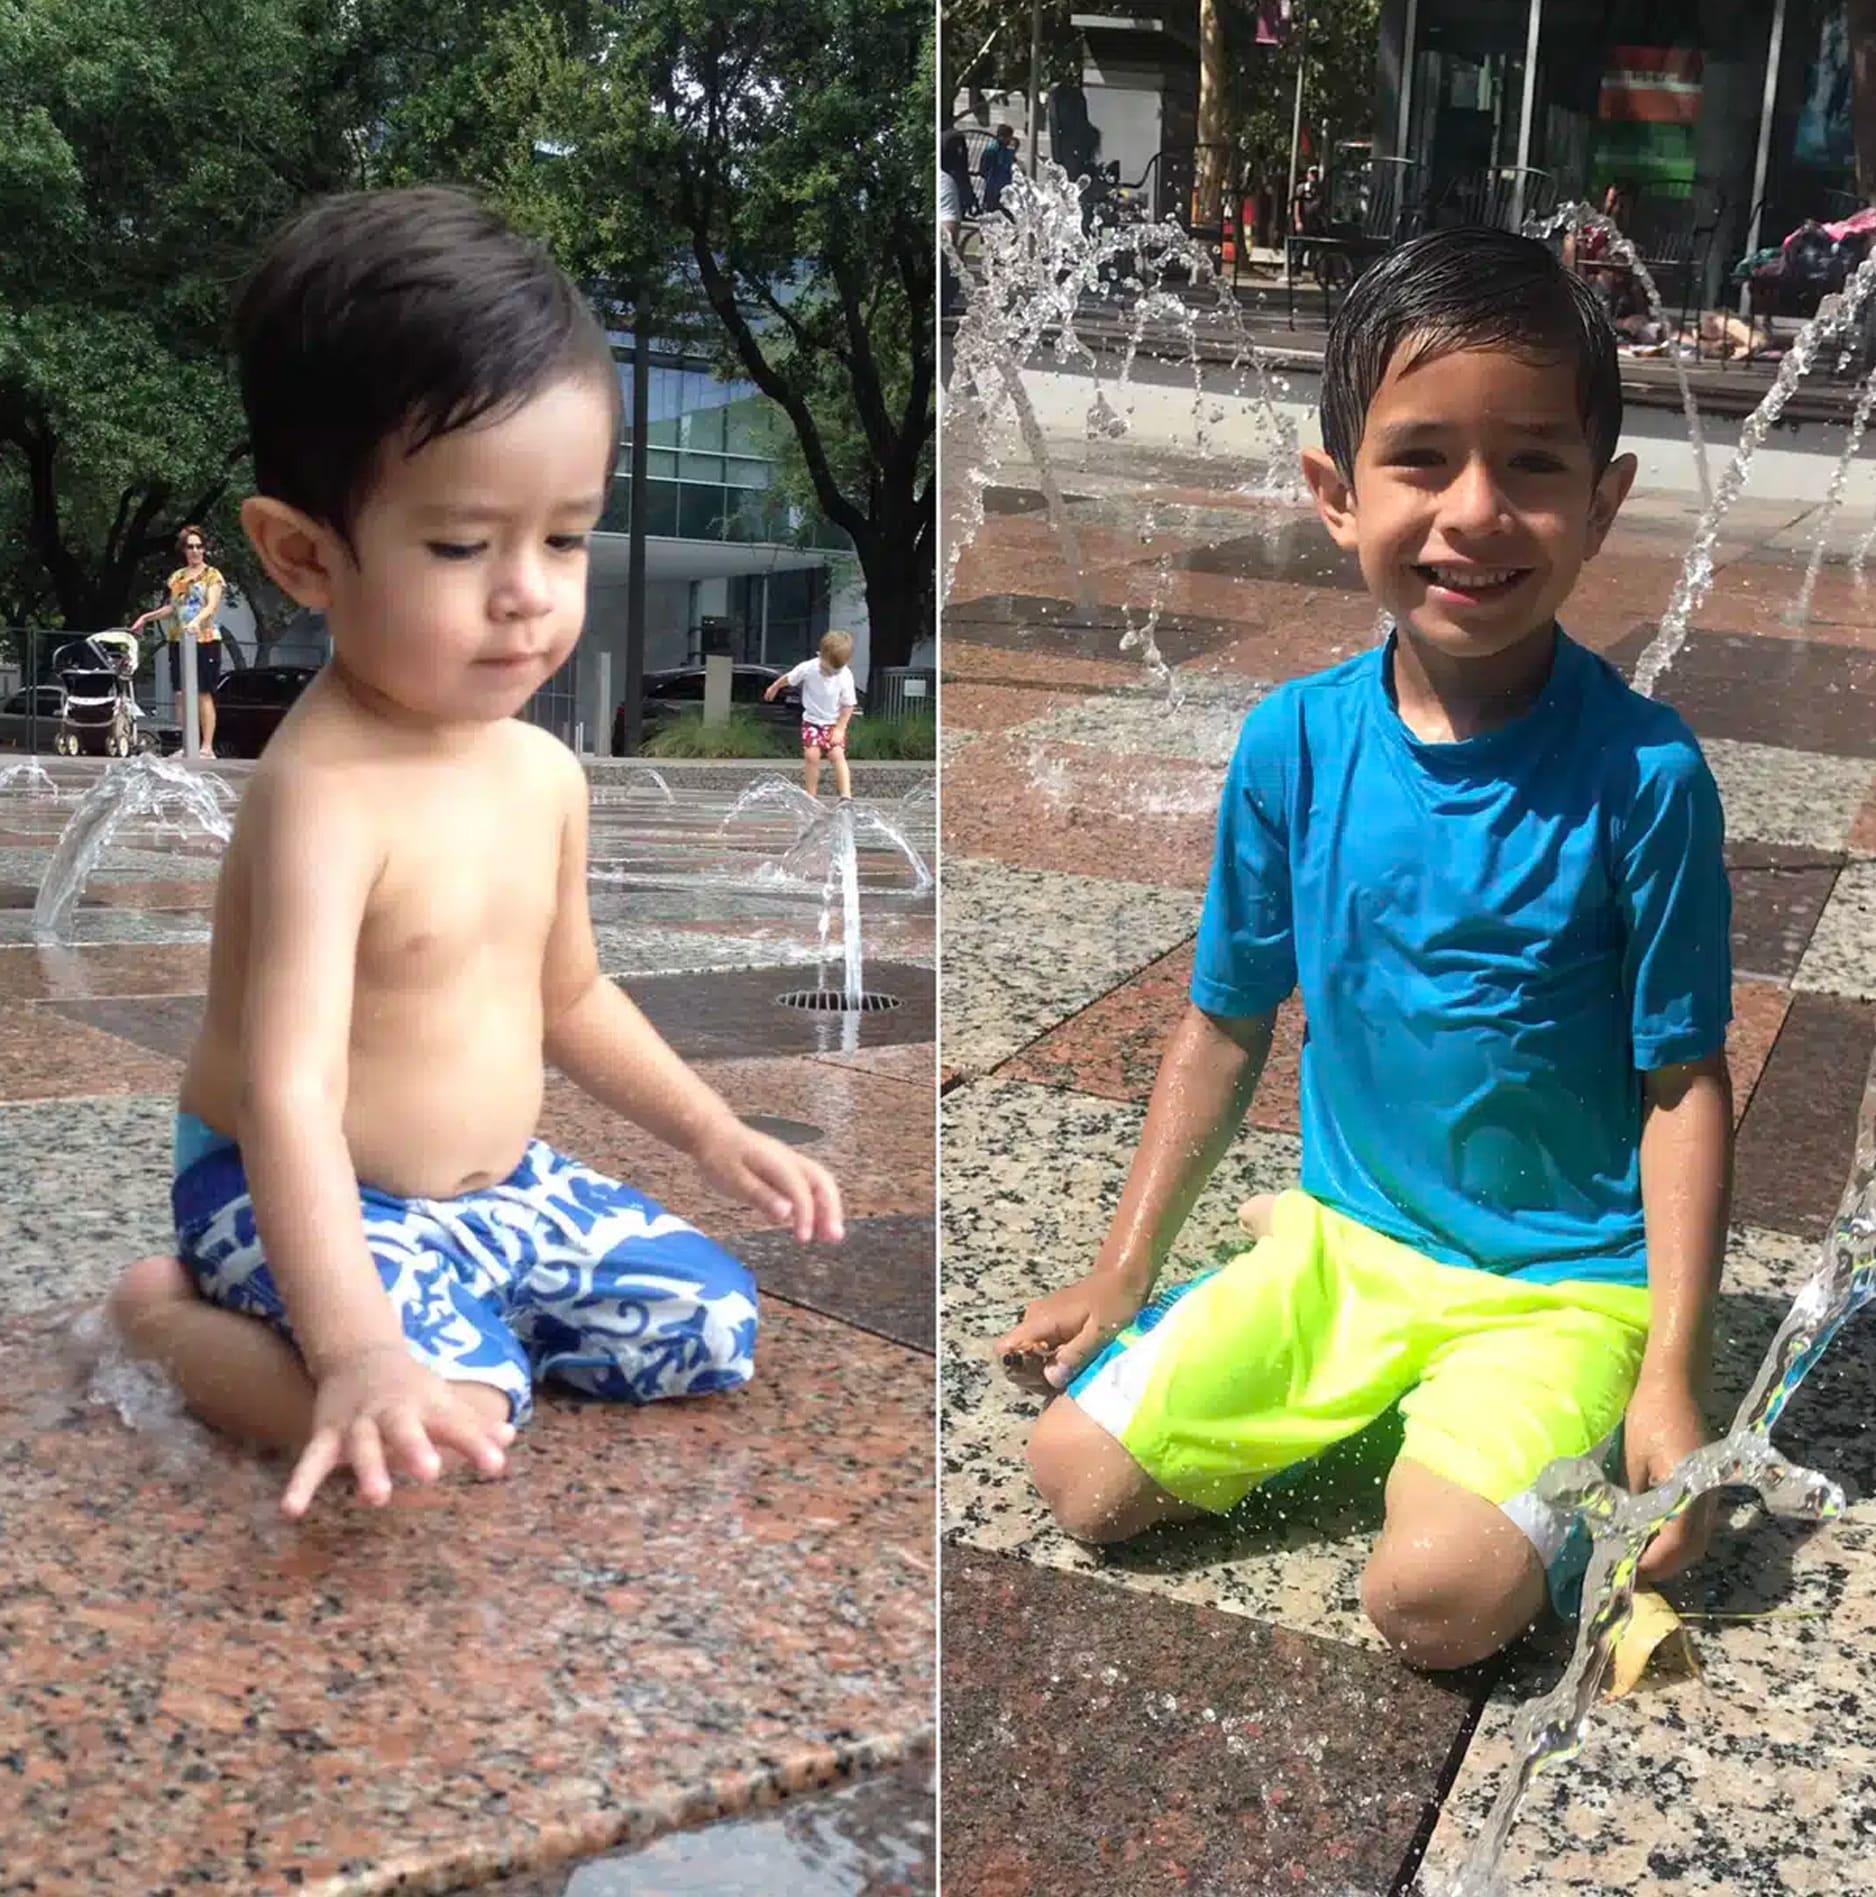 I have been going to Discovery Green for years and when I had my son in 2011, I couldn’t wait to bring him to the splash pad. I would like to share a memory of a same photo years apart. We still go to Discovery Green often and share the winter, spring, summer, and fall at Discovery Green. Whether it’s the splash pad, ice skating, my January marathons, to see art sculptures, watch the dog water jumps, or take a stroll through the different arts displayed. We love it! Thank you for being Discovery Green to Houston!!! — Margarita